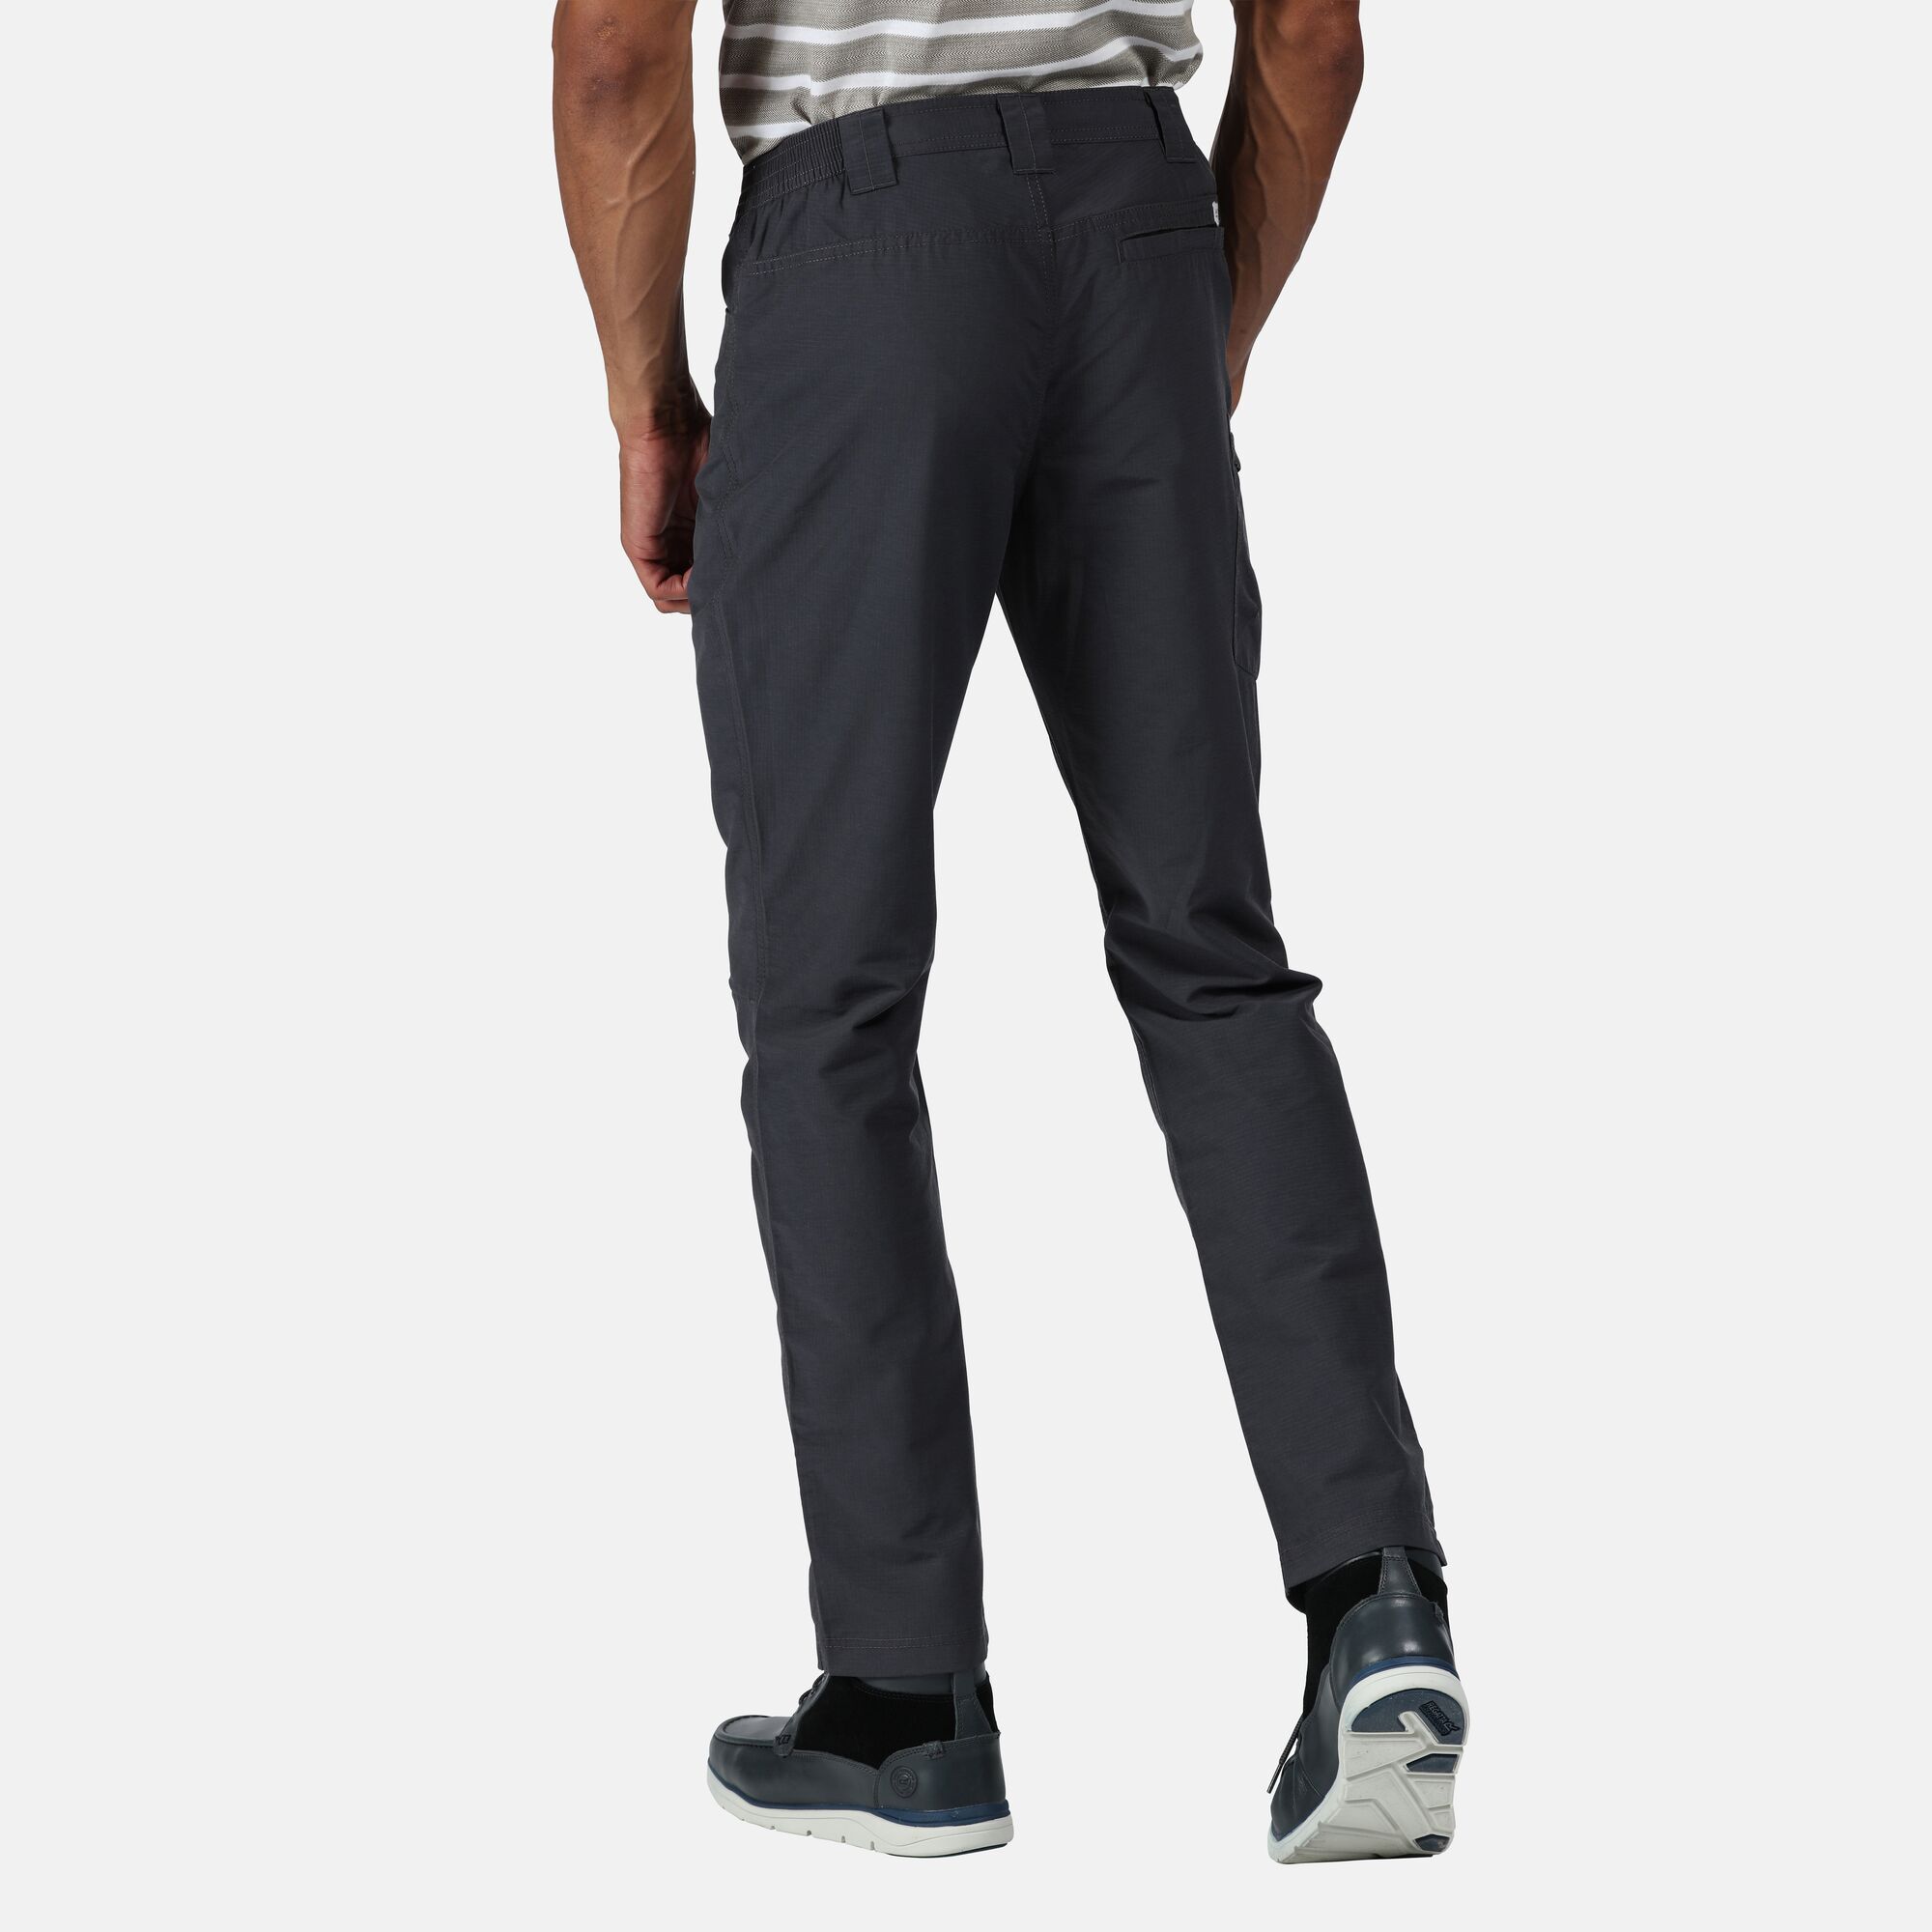 Material: Coolweave 70% Cotton/30% Polyester ripstop fabric. Lightweight trousers with button closure, zip fly and part-elasticated waist. Multi pocketed.